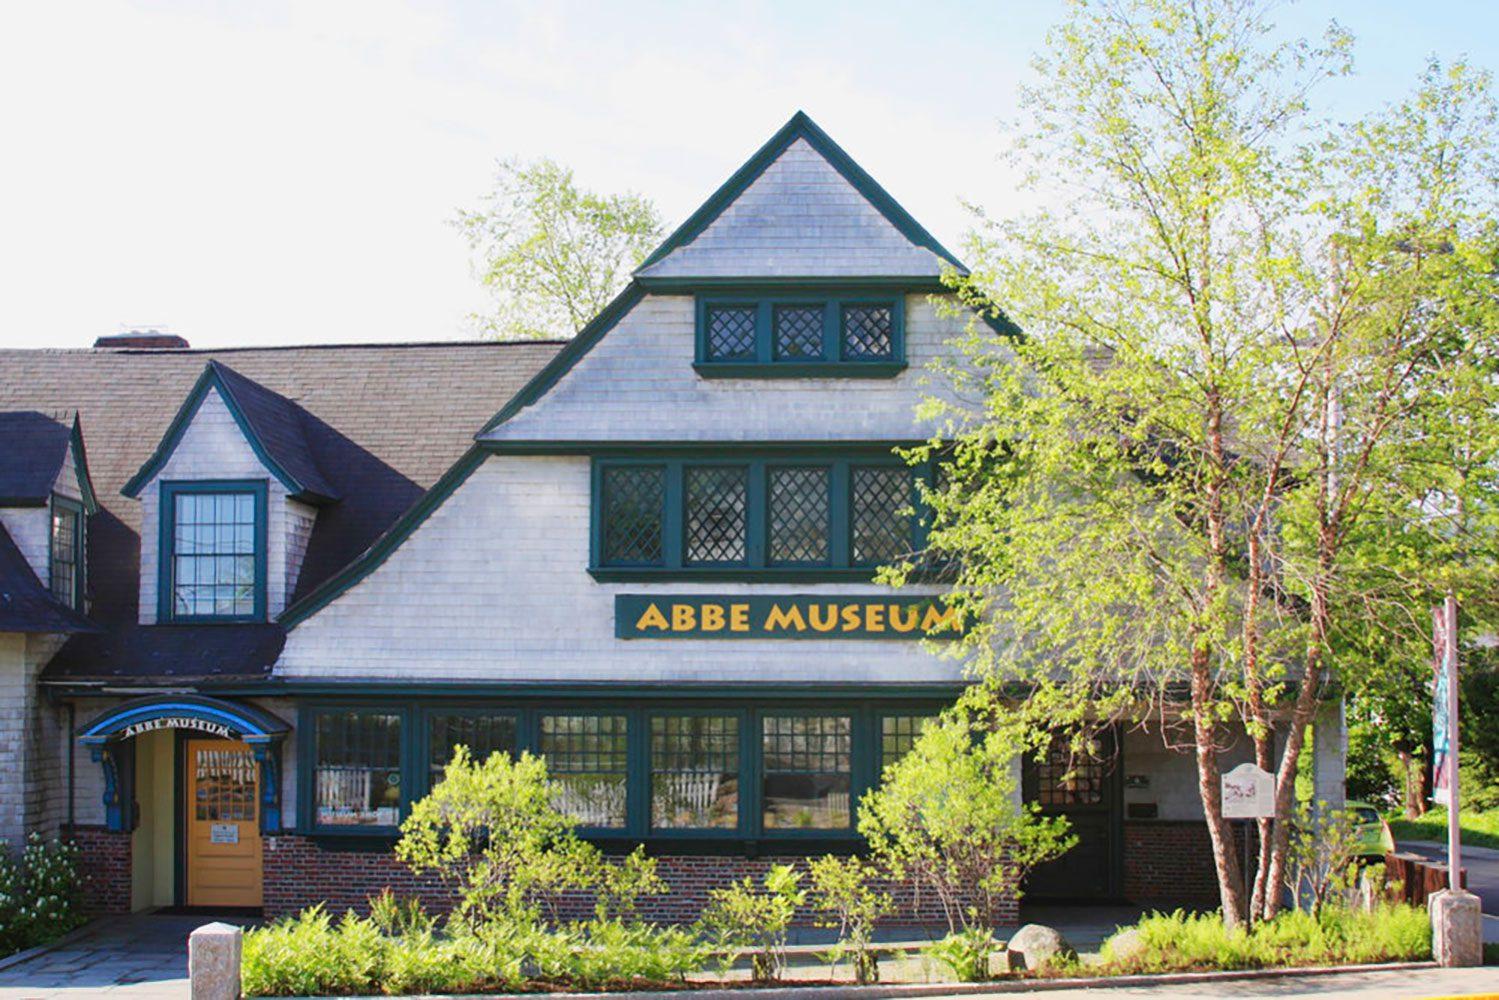 Abbe Museum's entrance surrounded by trees and gardens in the summer